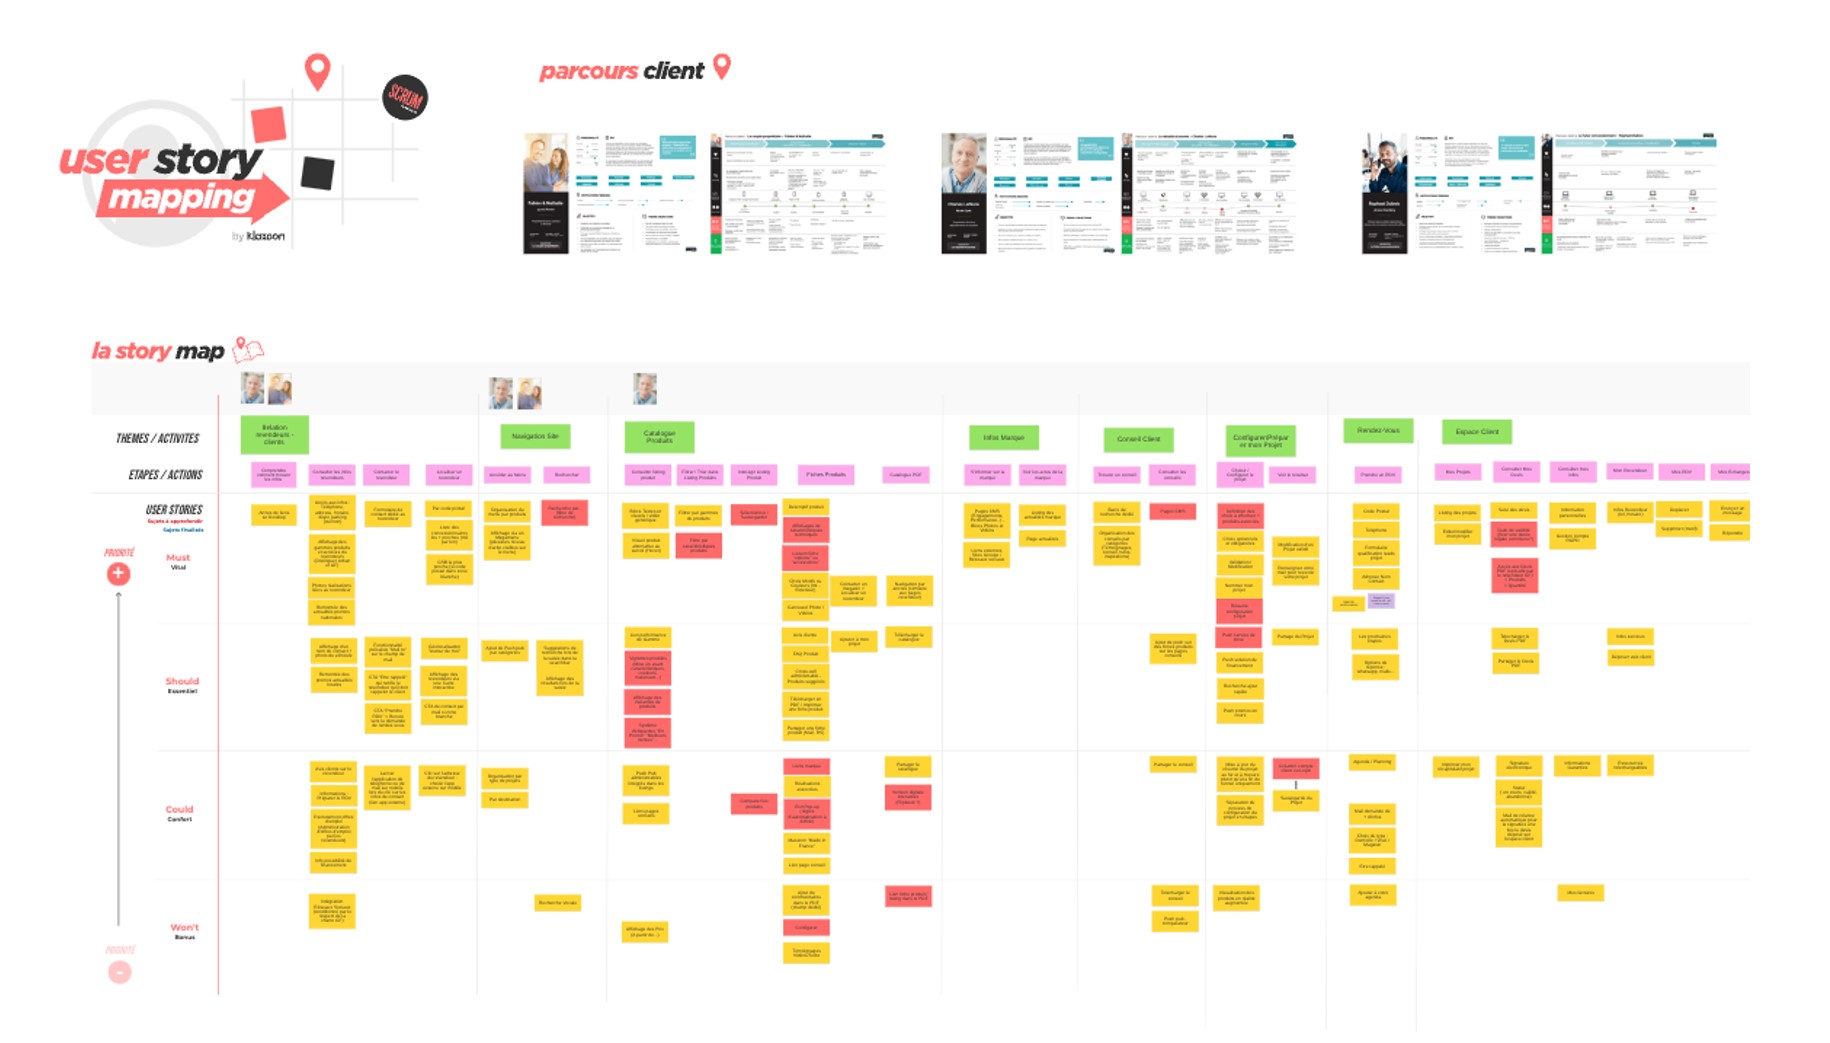 klaxoon outil de user story mapping